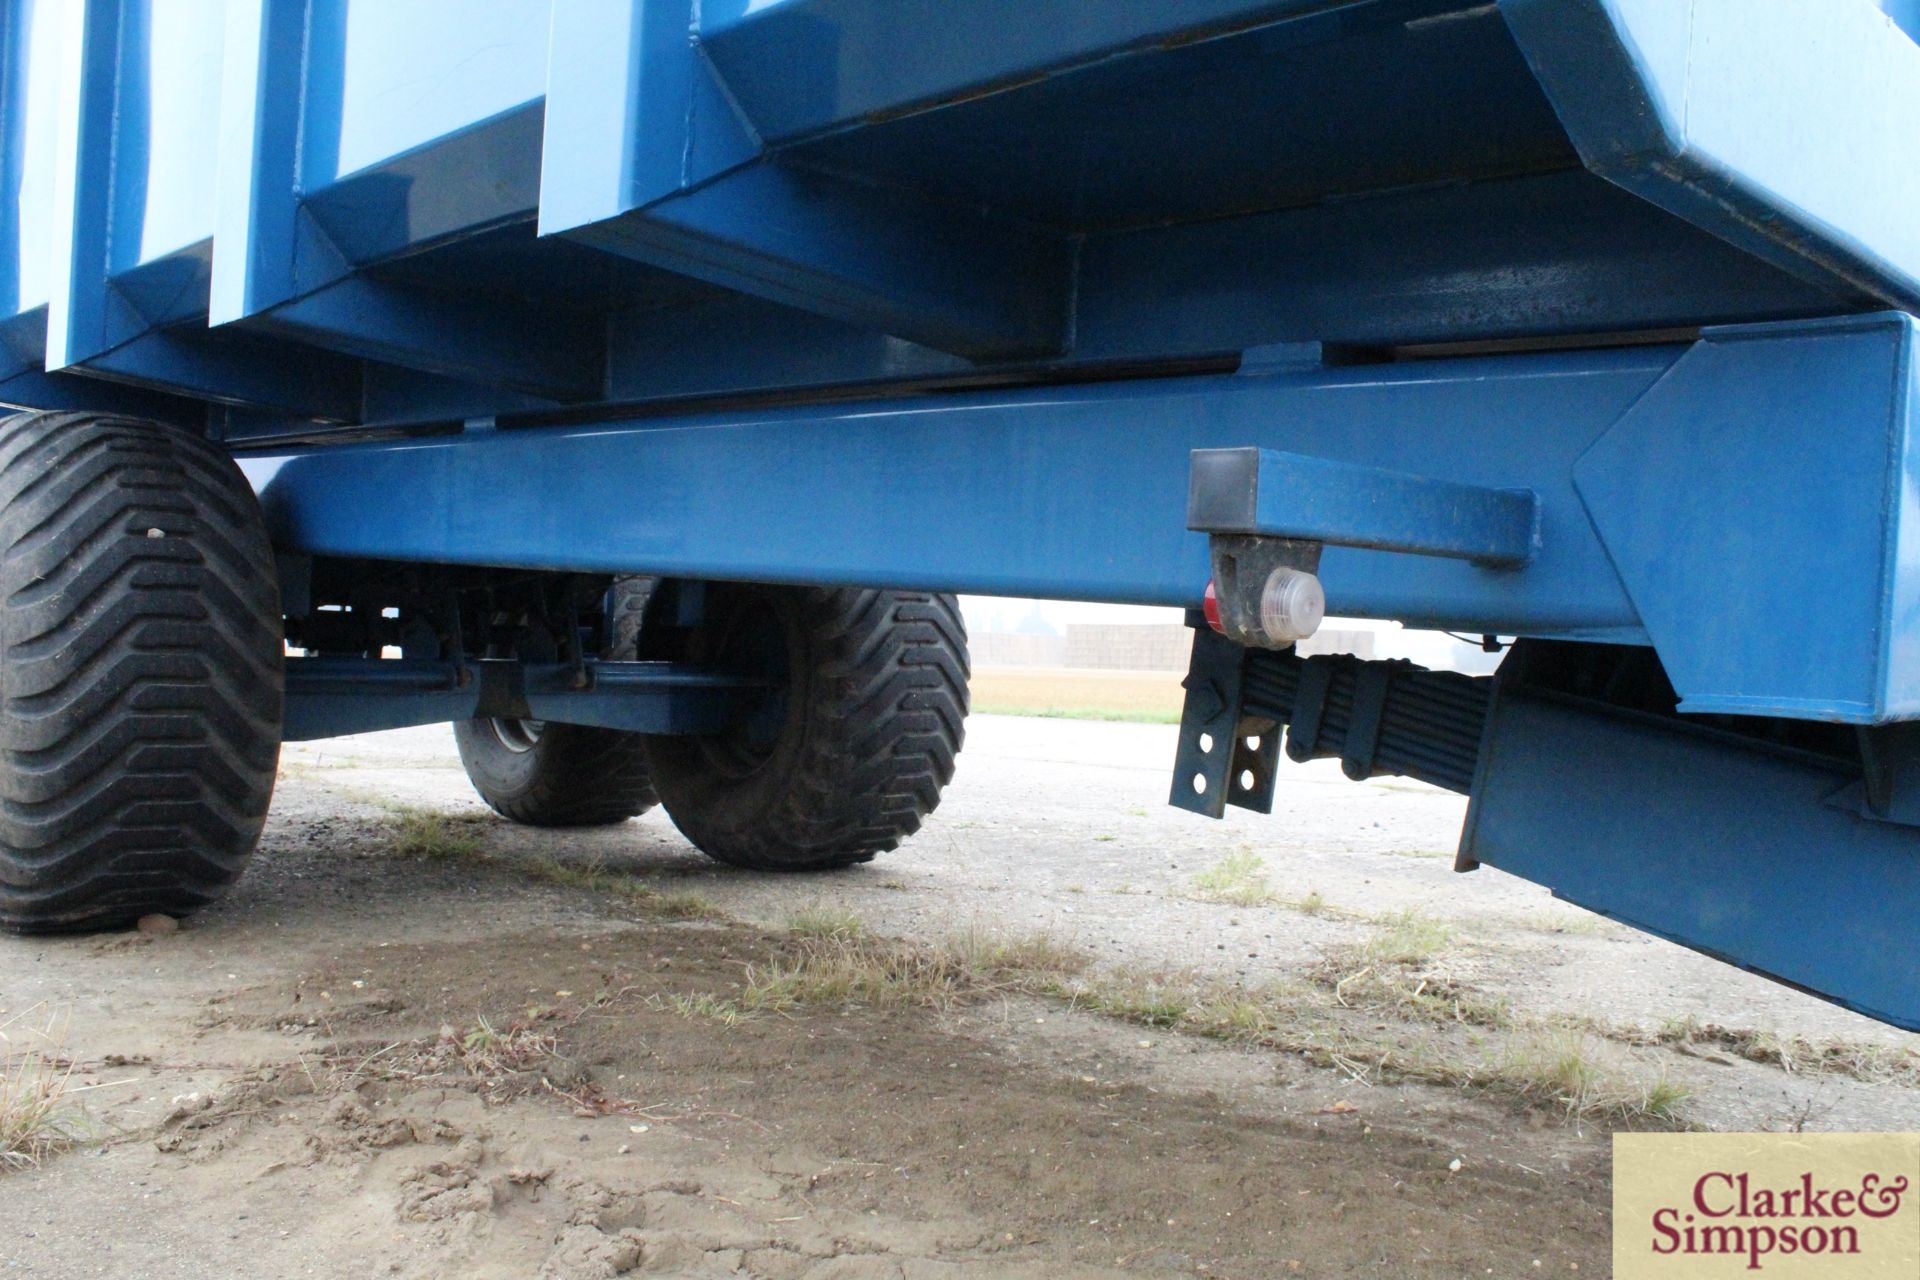 AS Marston ACE14D 14T twin axle dump trailer. 03/2011. Serial number 217341. With oil brakes, - Image 16 of 26